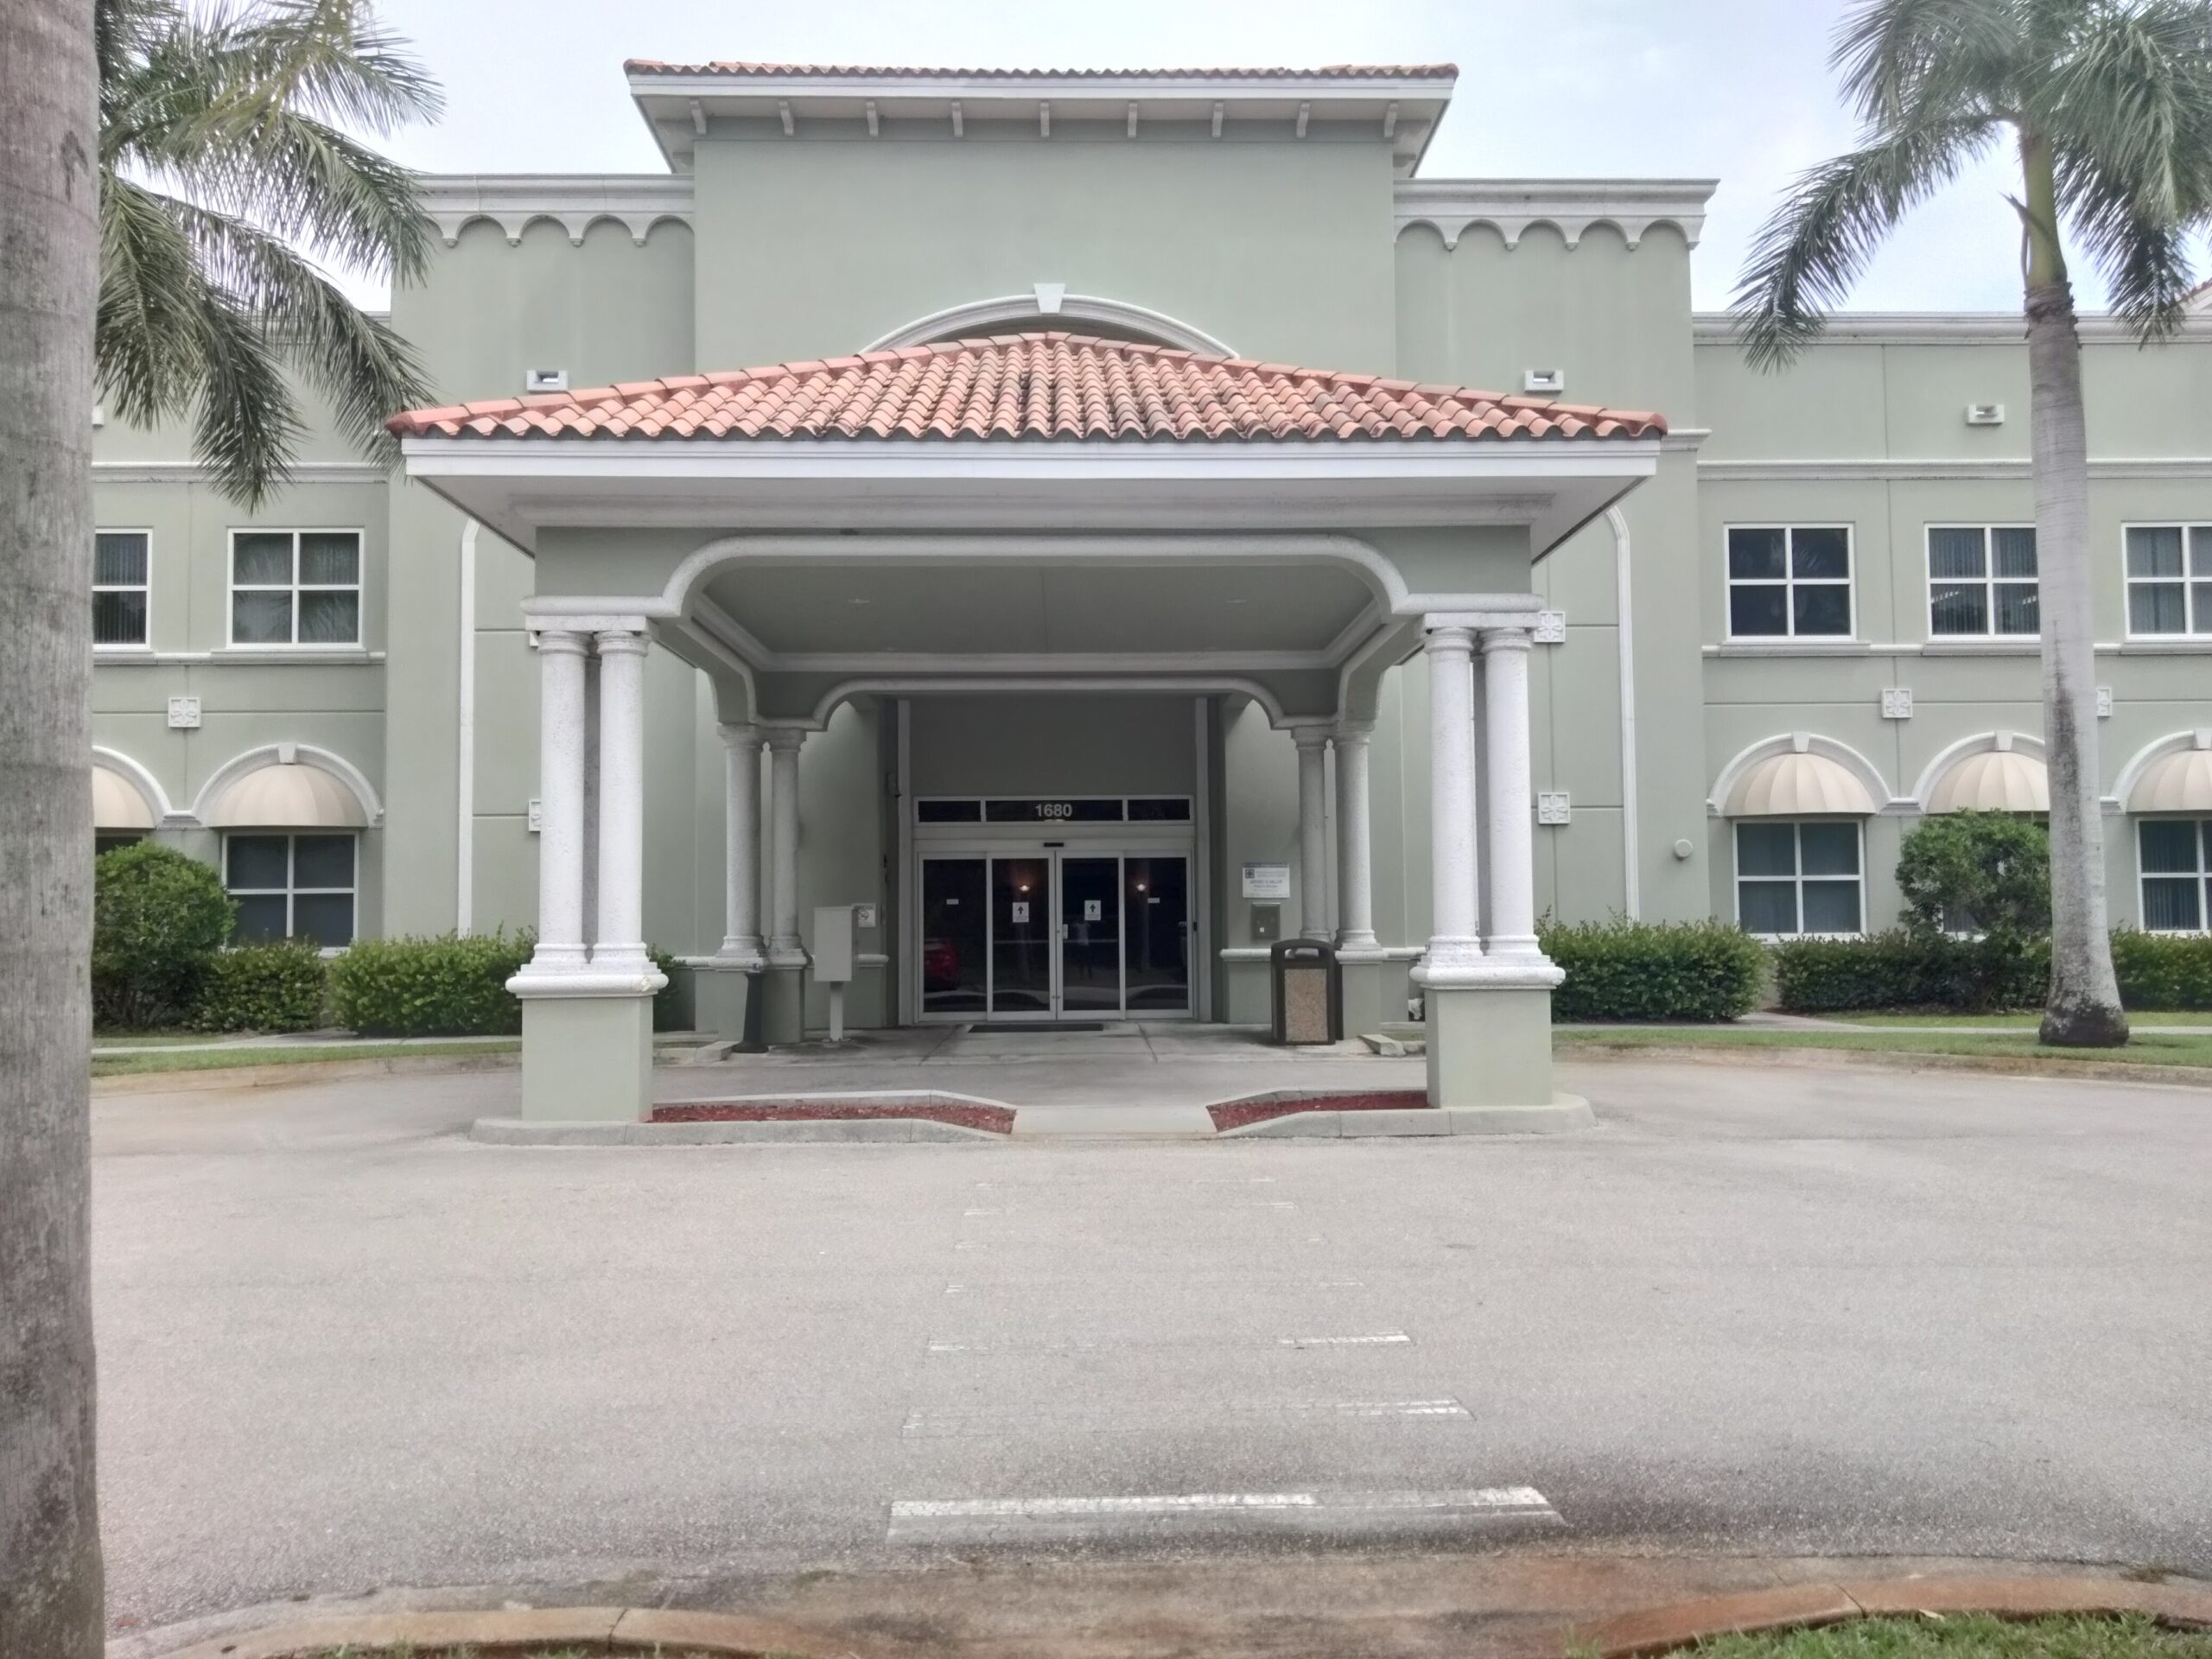 The exterior front entrance of Pinnacle Wellness Group, located in Port Saint Lucie, Florida